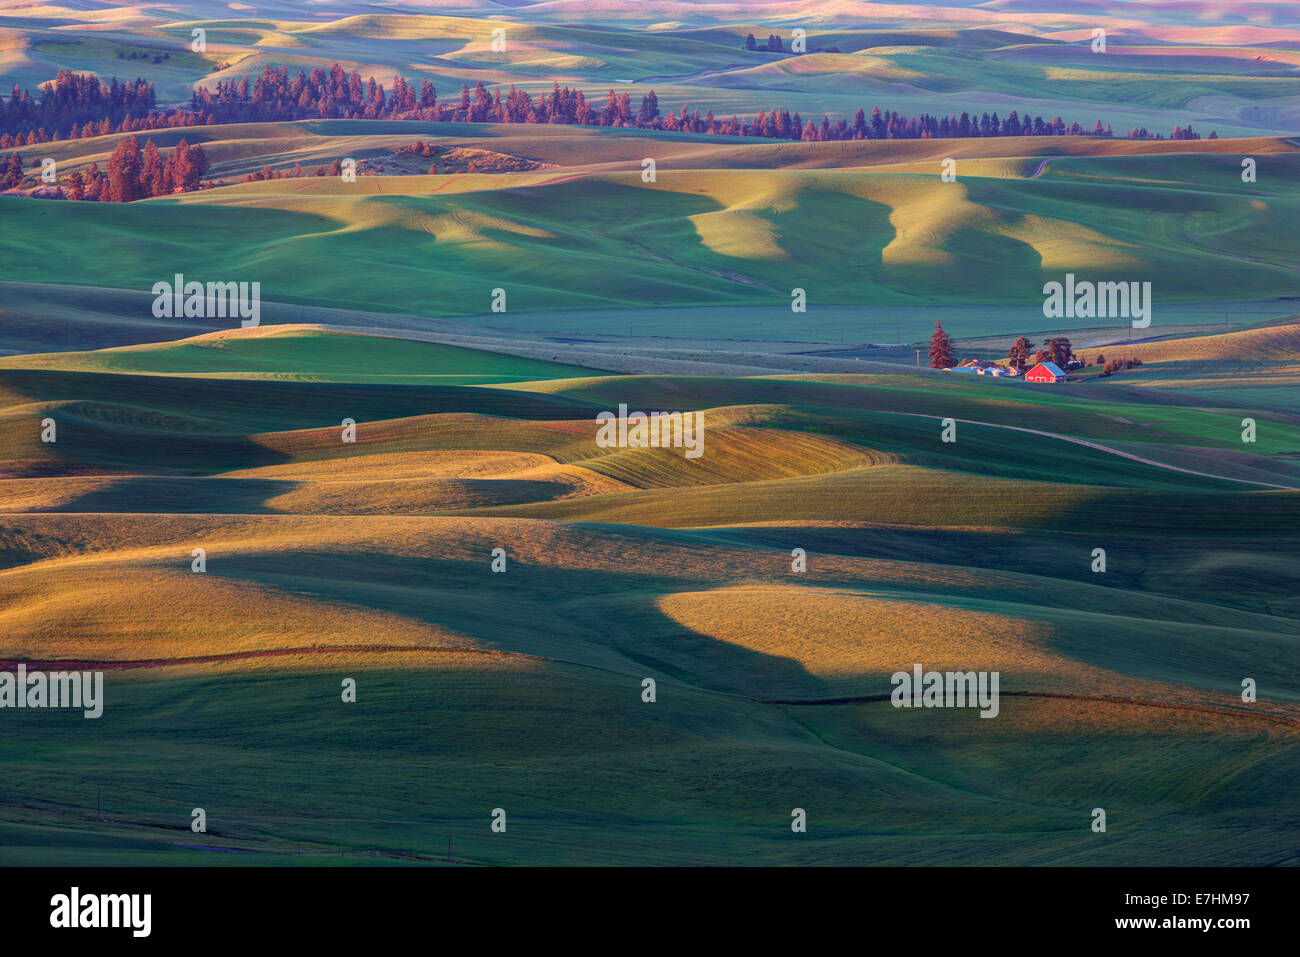 Farmland in the Palouse region of Washington State, view from Steptoe Butte State Park, USA Stock Photo